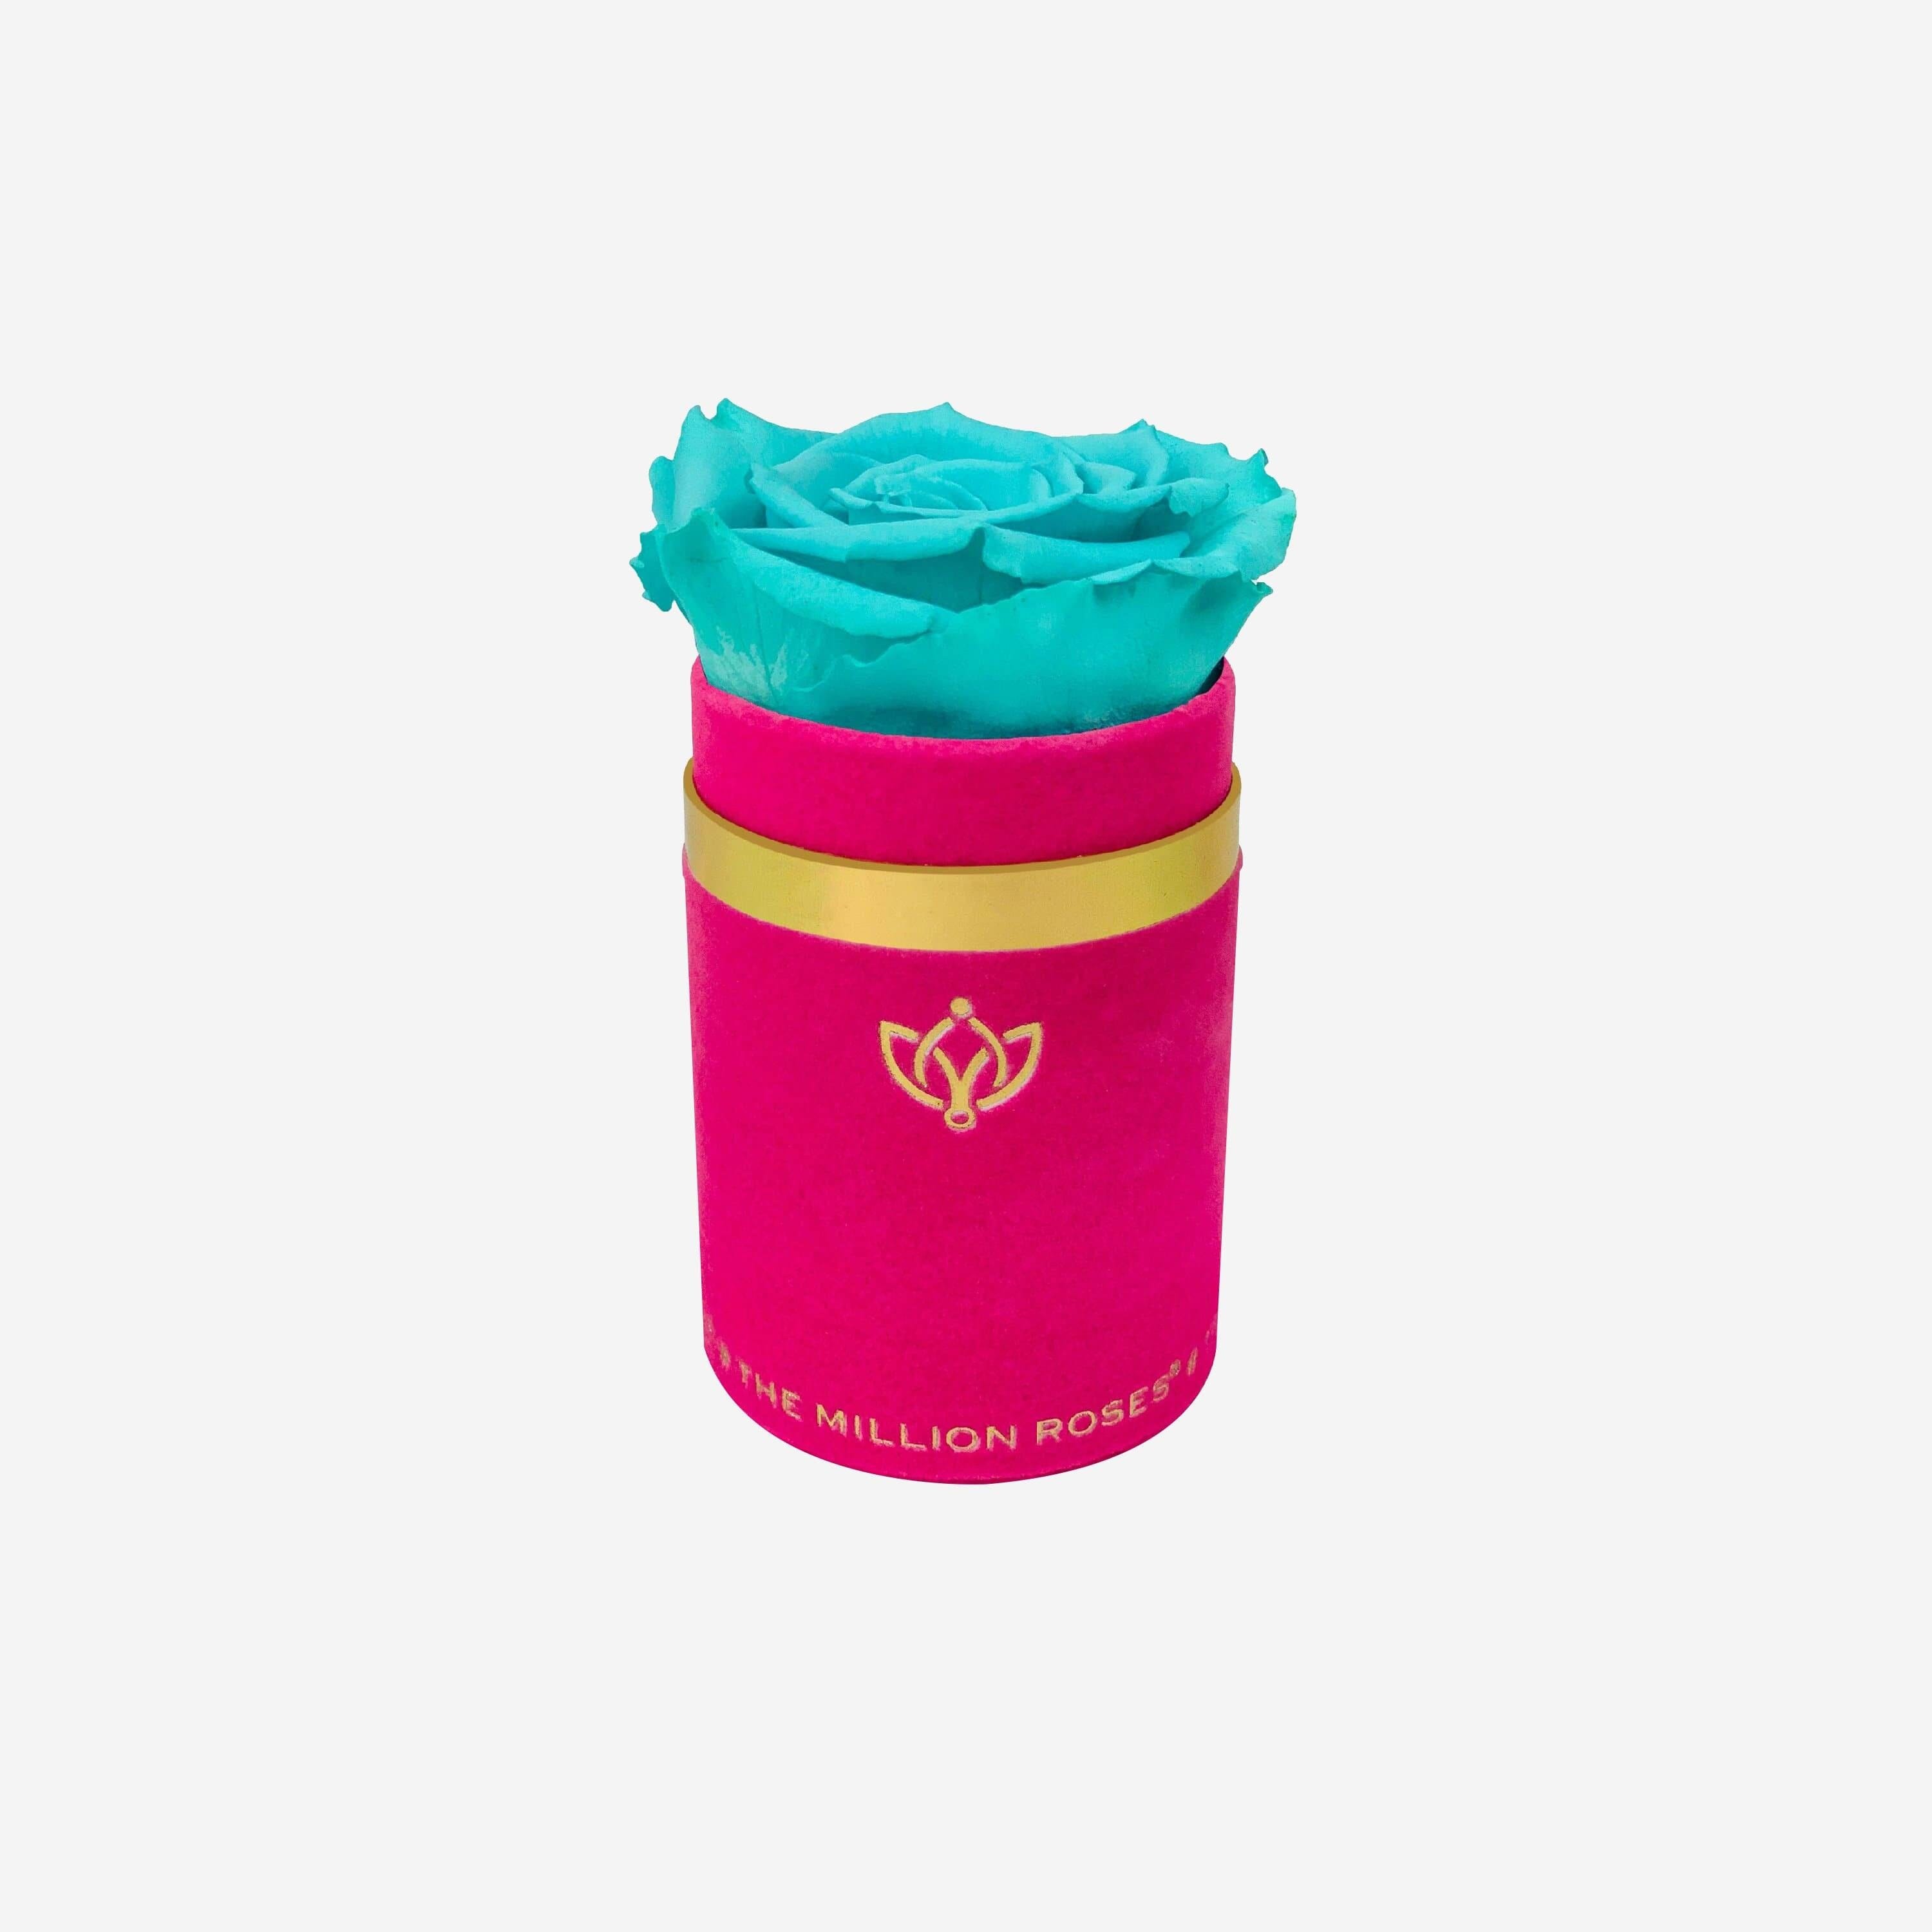 Single Hot Pink Suede Box | Turquoise Rose - The Million Roses